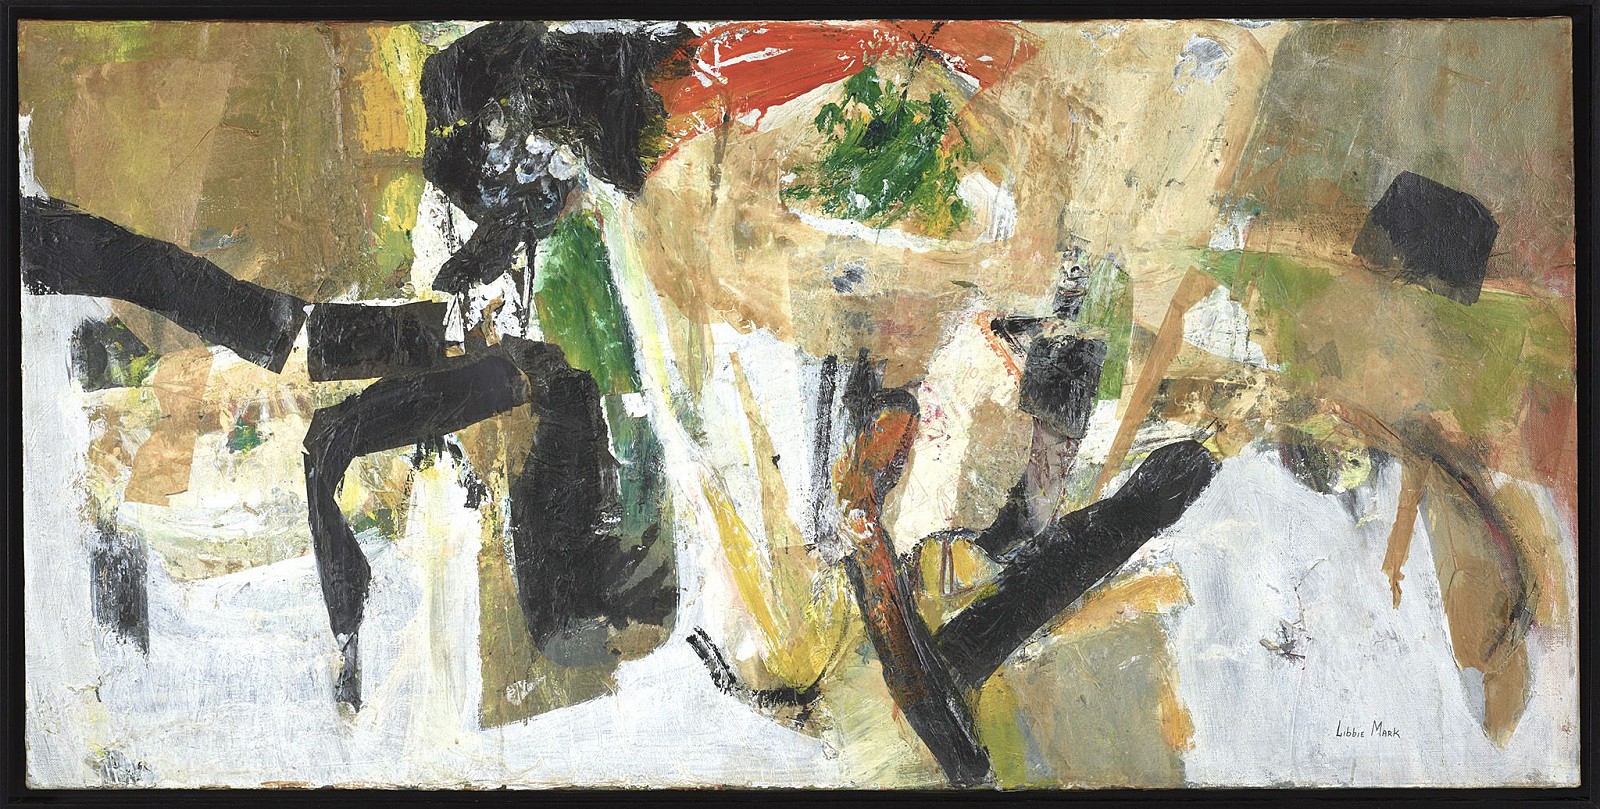 Libbie Mark, Untitled Collage Painting, 1957-65
Acrylic and paper collage on linen, 24 x 48 in. (61 x 121.9 cm)
MARK-00019